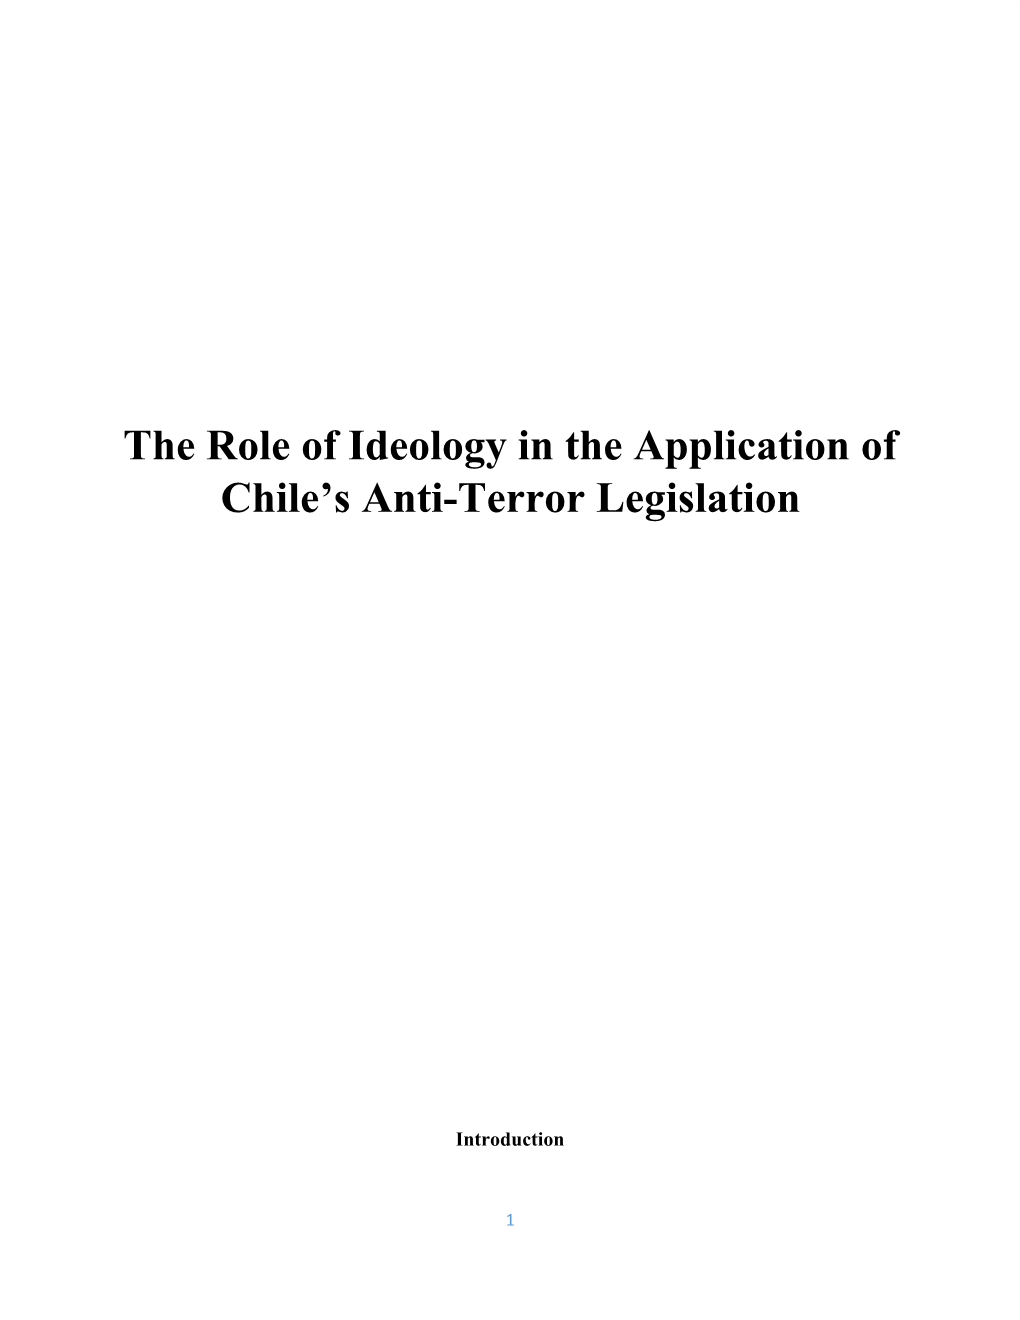 The Role of Ideology in the Application of Chile's Anti-Terror